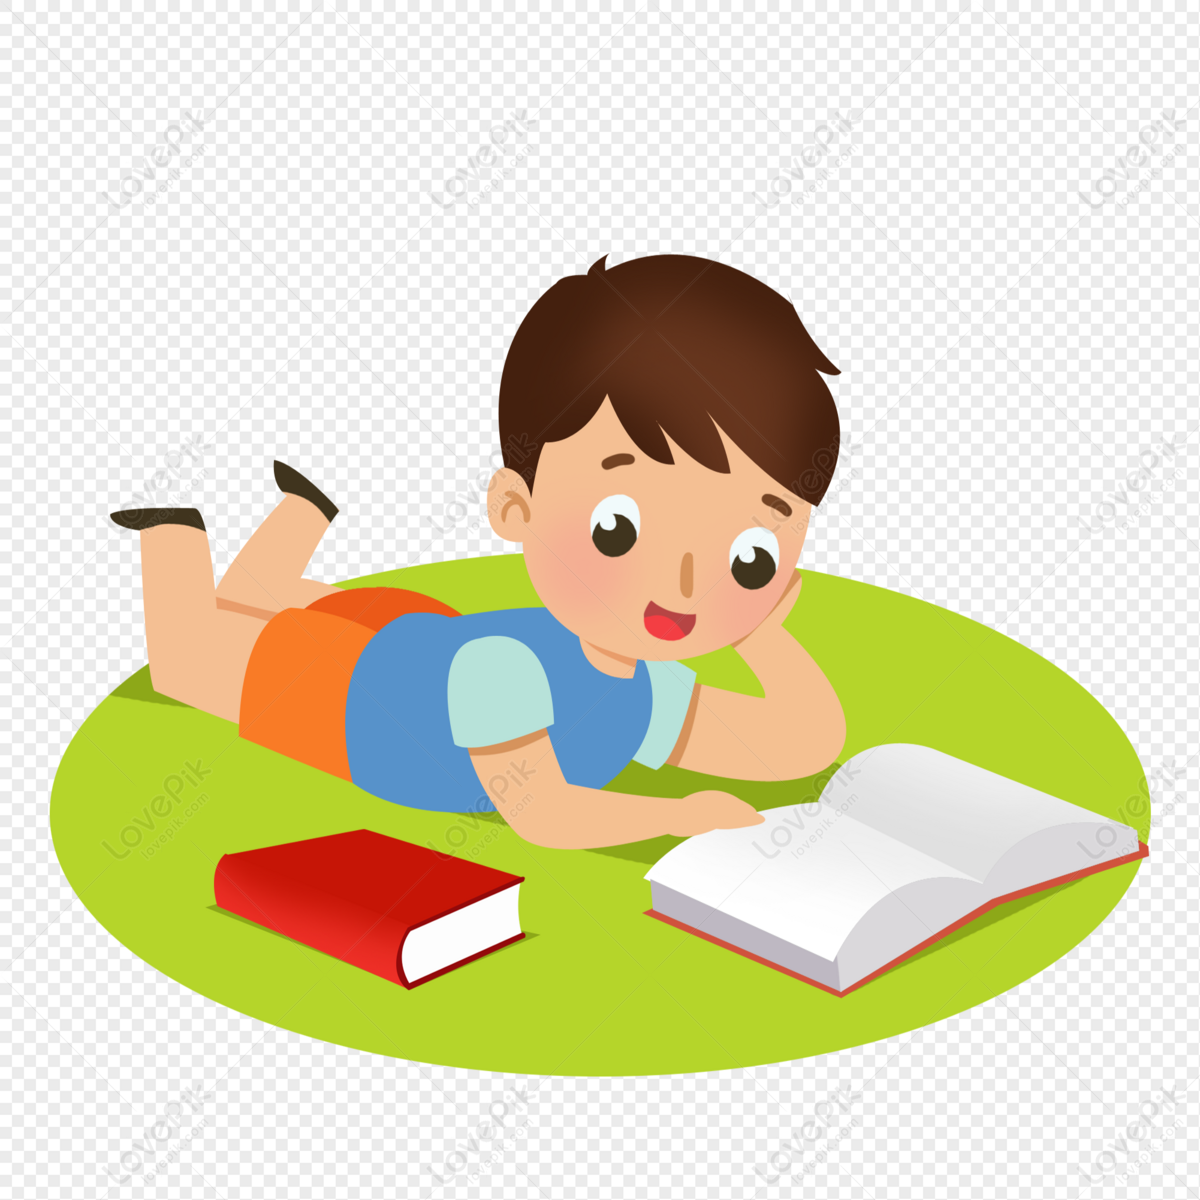 Cartoon Boy Reading A Book On The Grass PNG Free Download And Clipart Image  For Free Download - Lovepik | 401273403